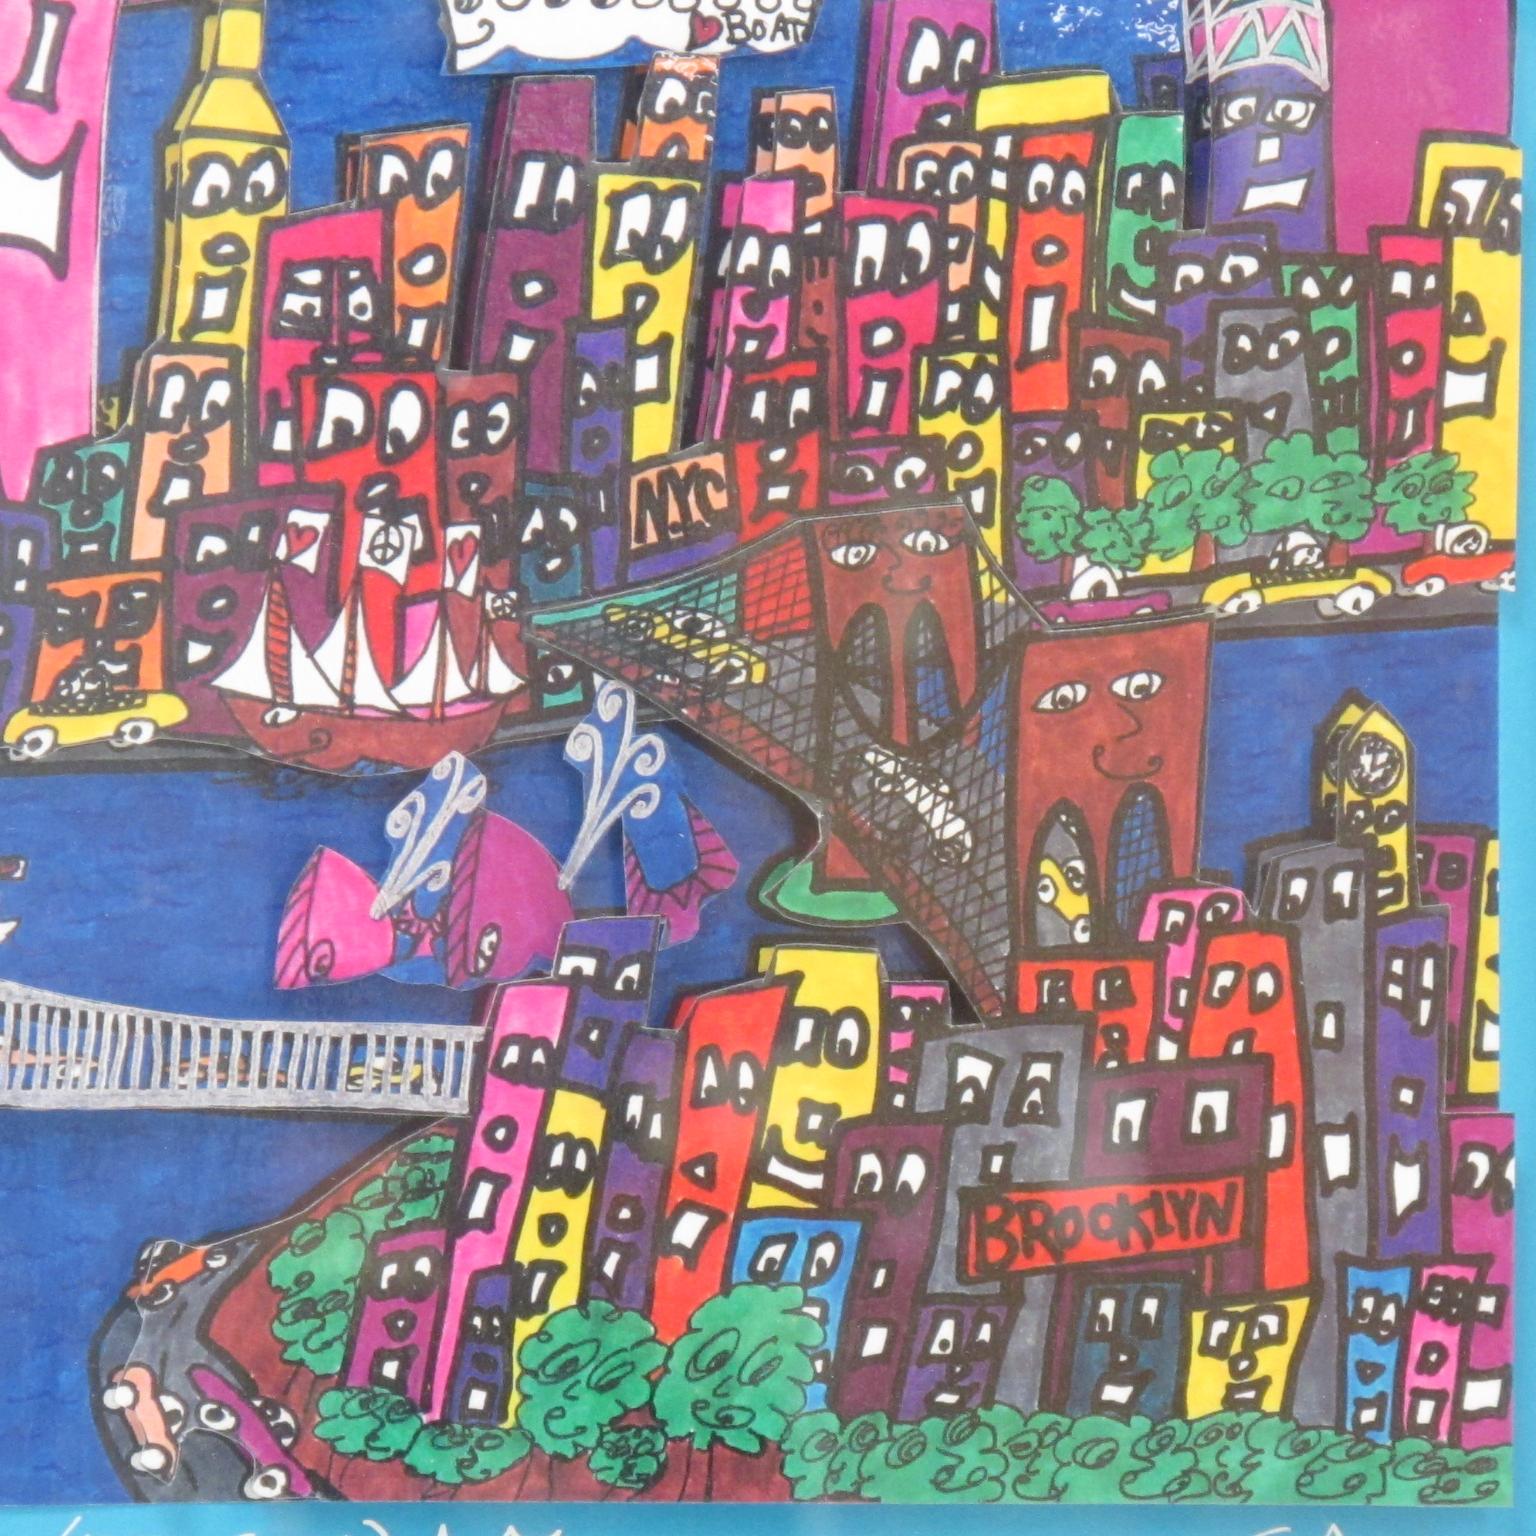 The Way We Were, 1973-2001 New York Cityscape Colorful 3D Art Collage Painting For Sale 11